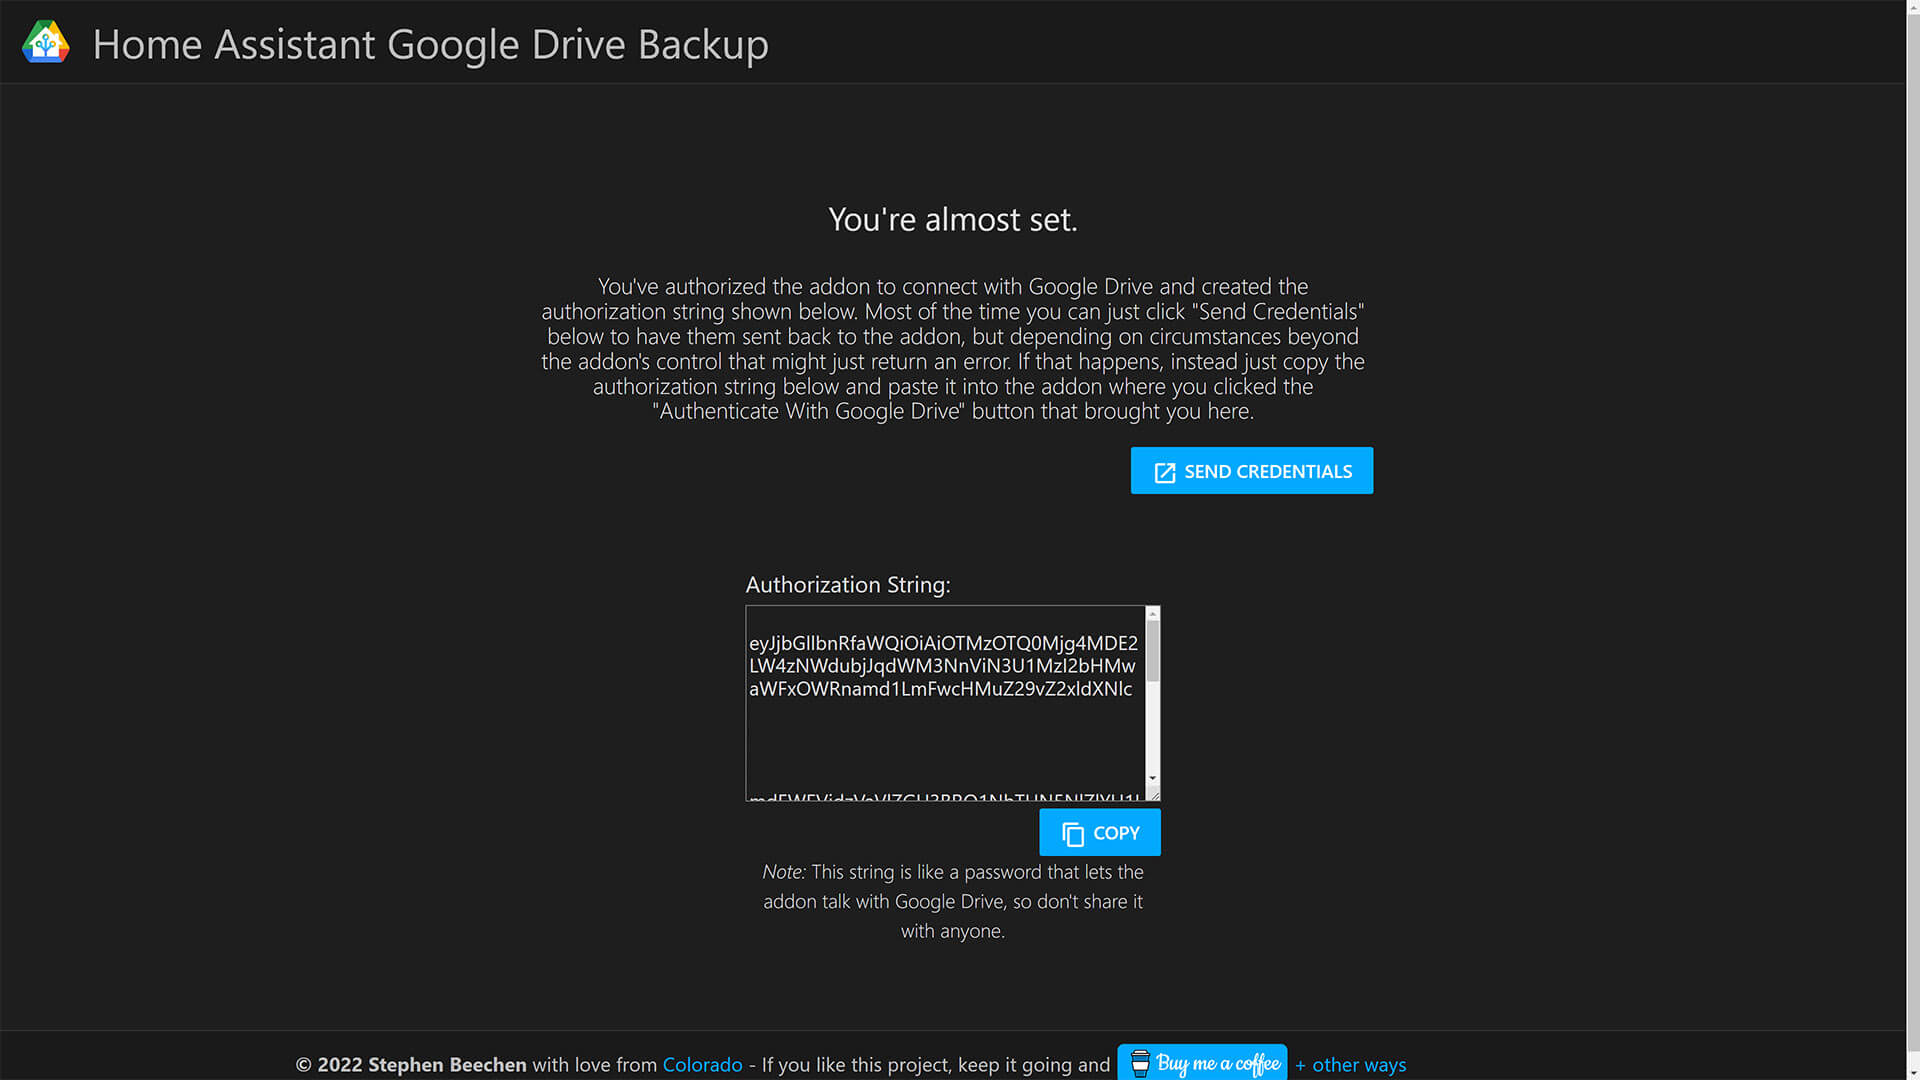 Home Assistant Google Drive Backup Add-on Authorization String